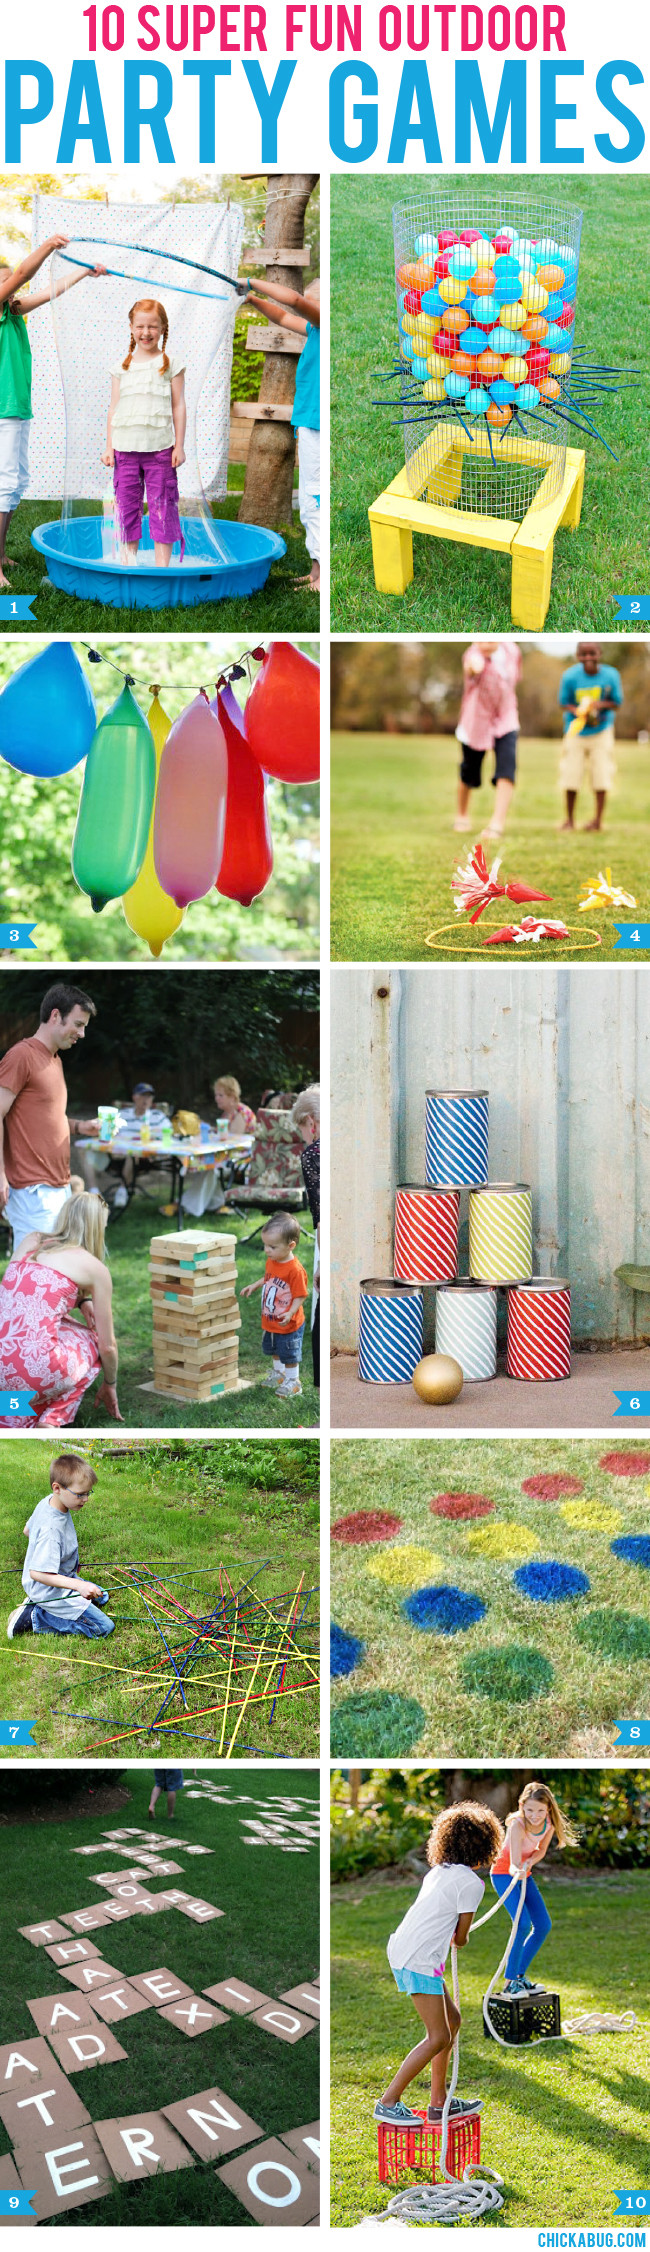 Fun Summer Activities For Adults
 10 super fun outdoor party games